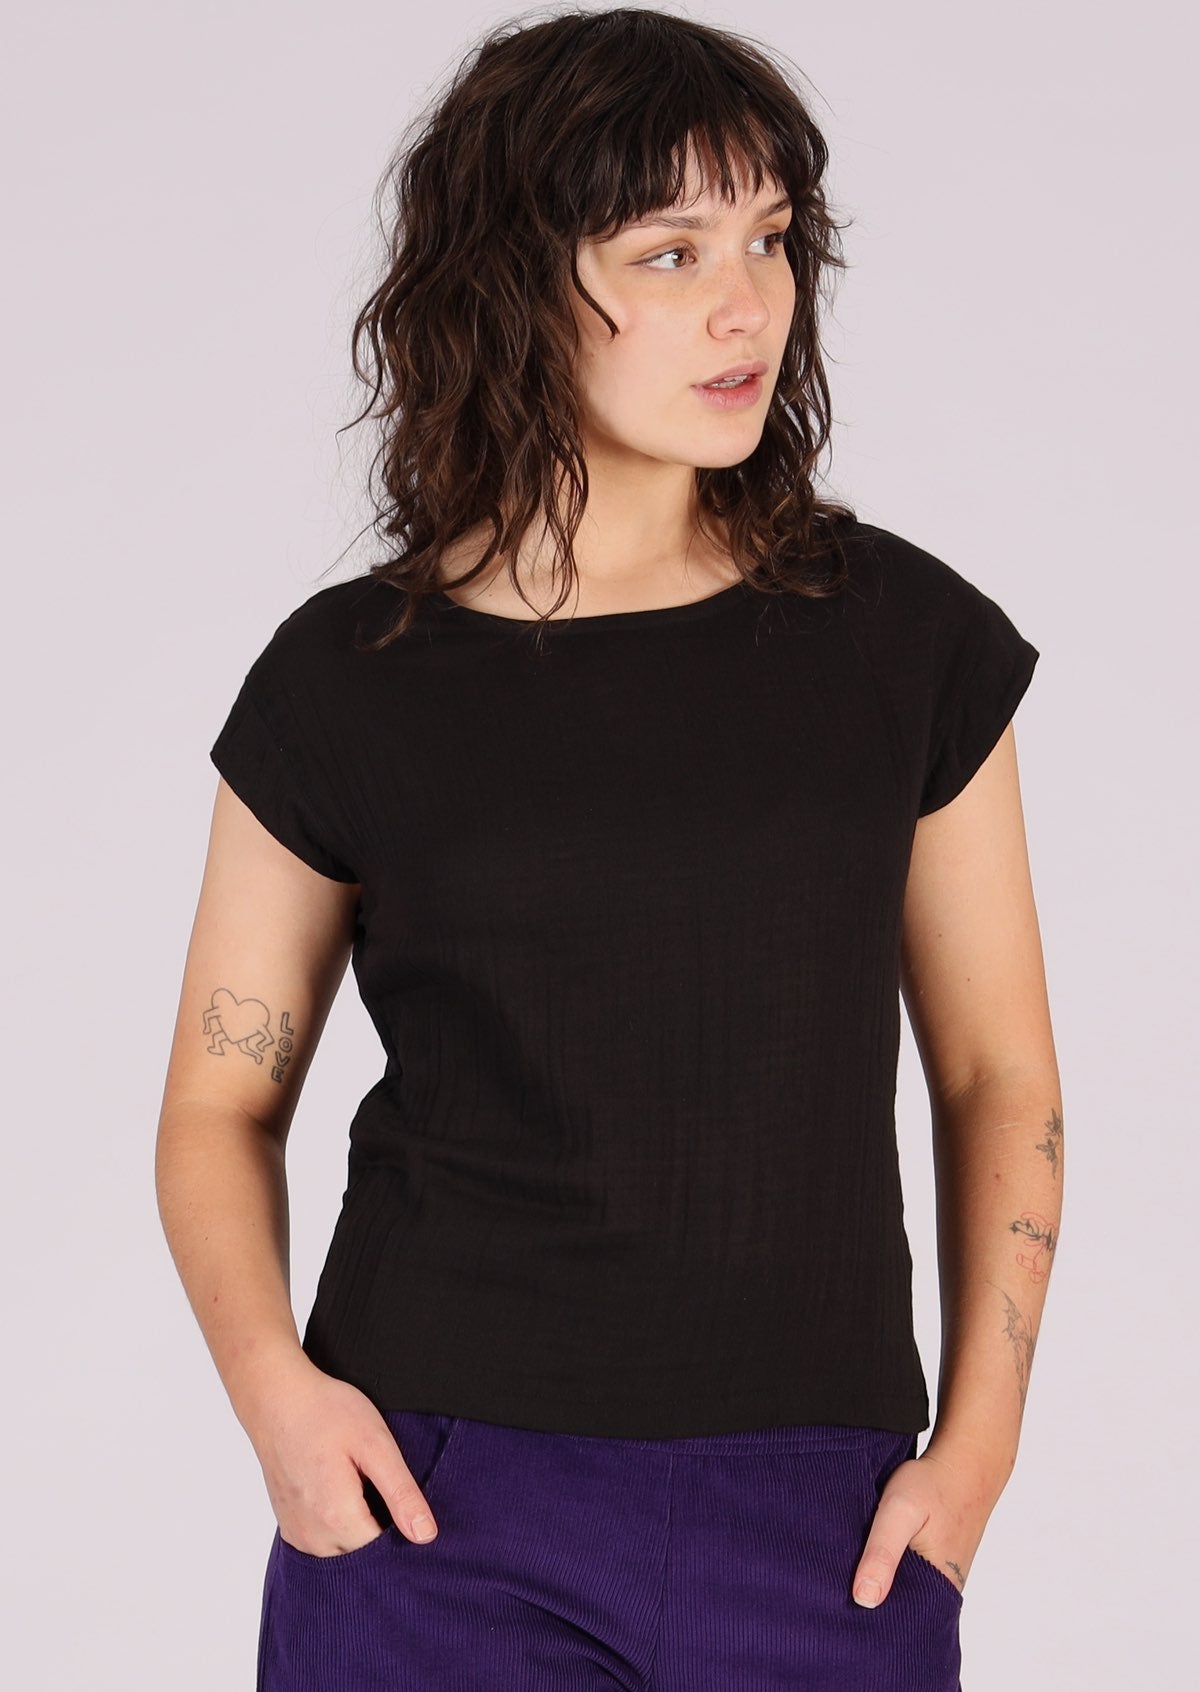 Black double cotton simple top with cap sleeves